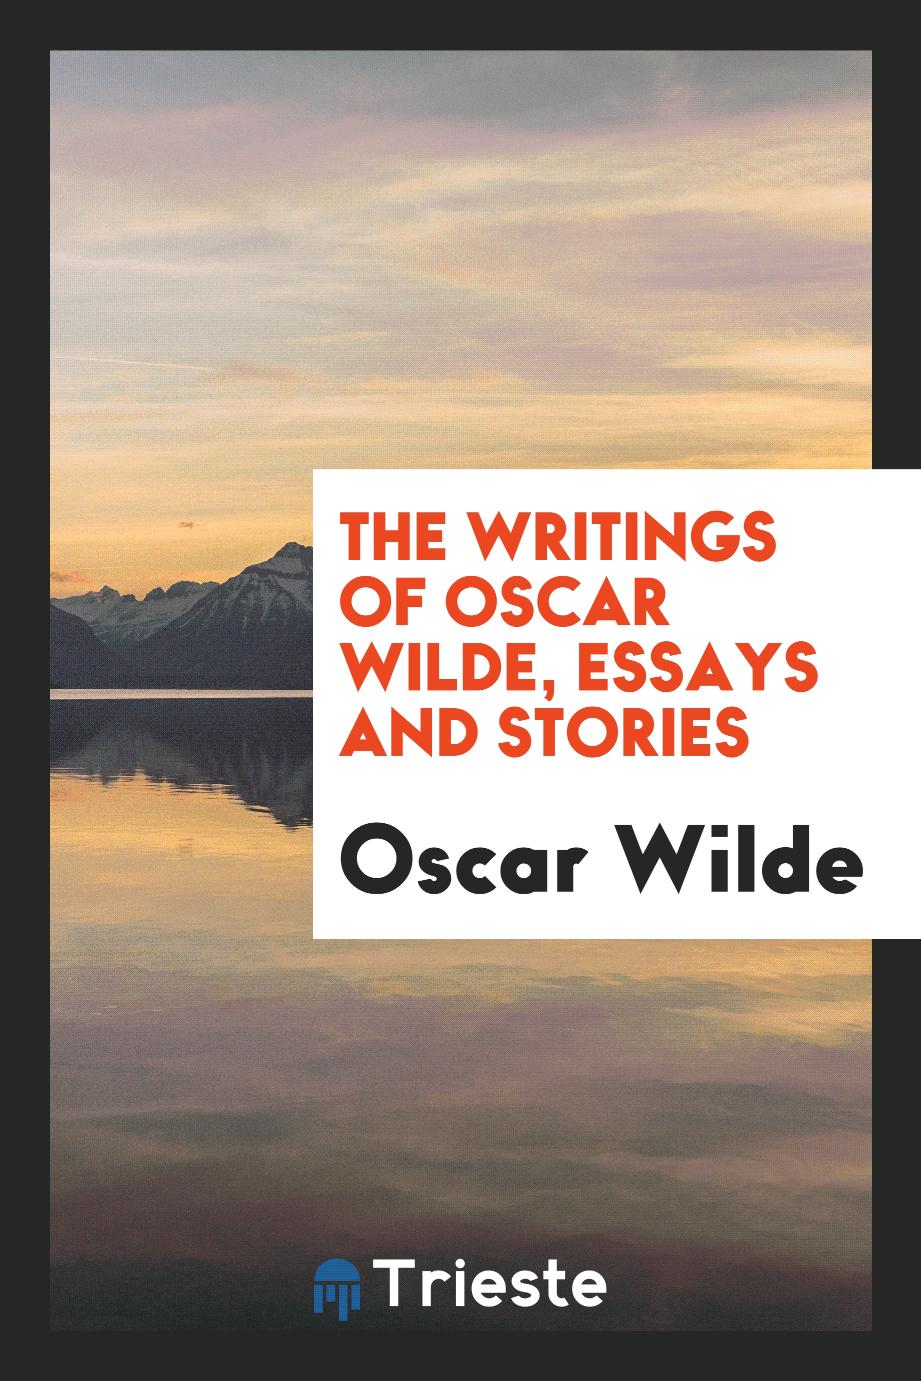 The writings of Oscar Wilde, Essays and Stories